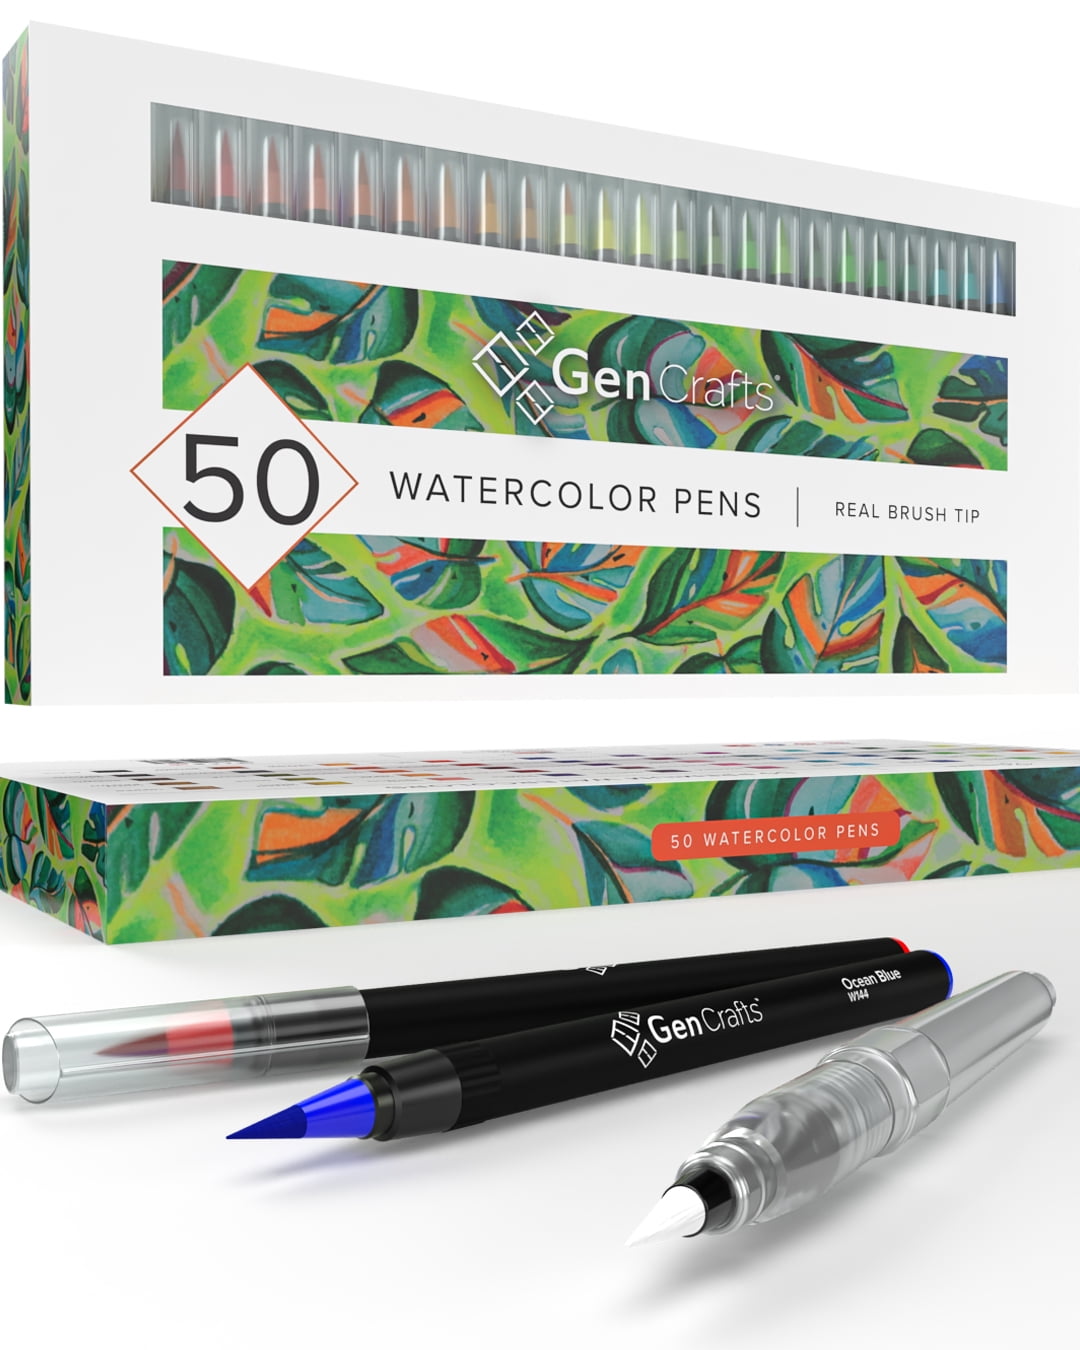 Watercolor Brush Pens by GenCrafts Set of 20 Premium Colors Real Brush Tips  NEW 74470999201